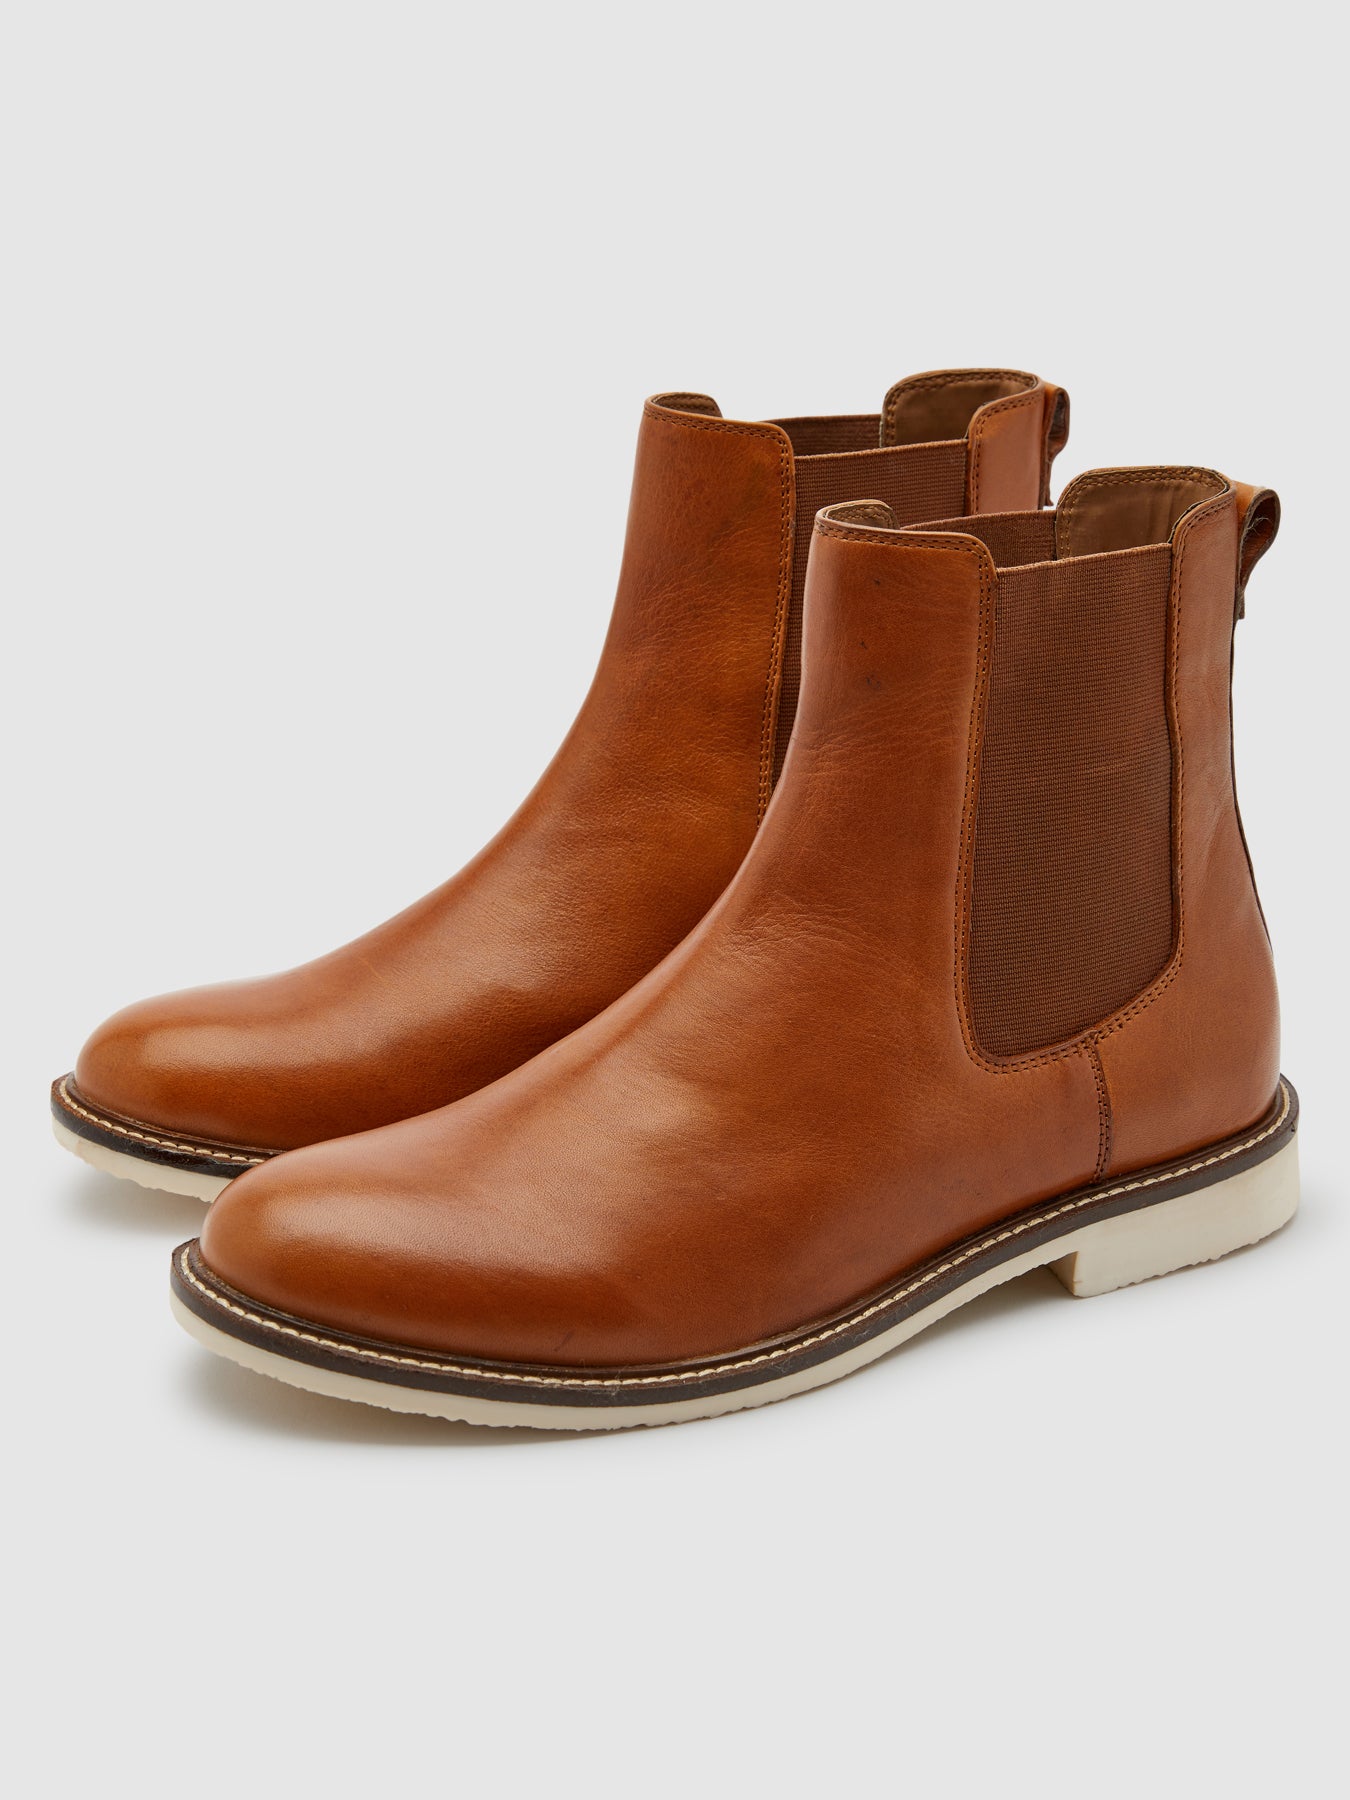 View Mansfield Leather Chelsea Boot In Tan information